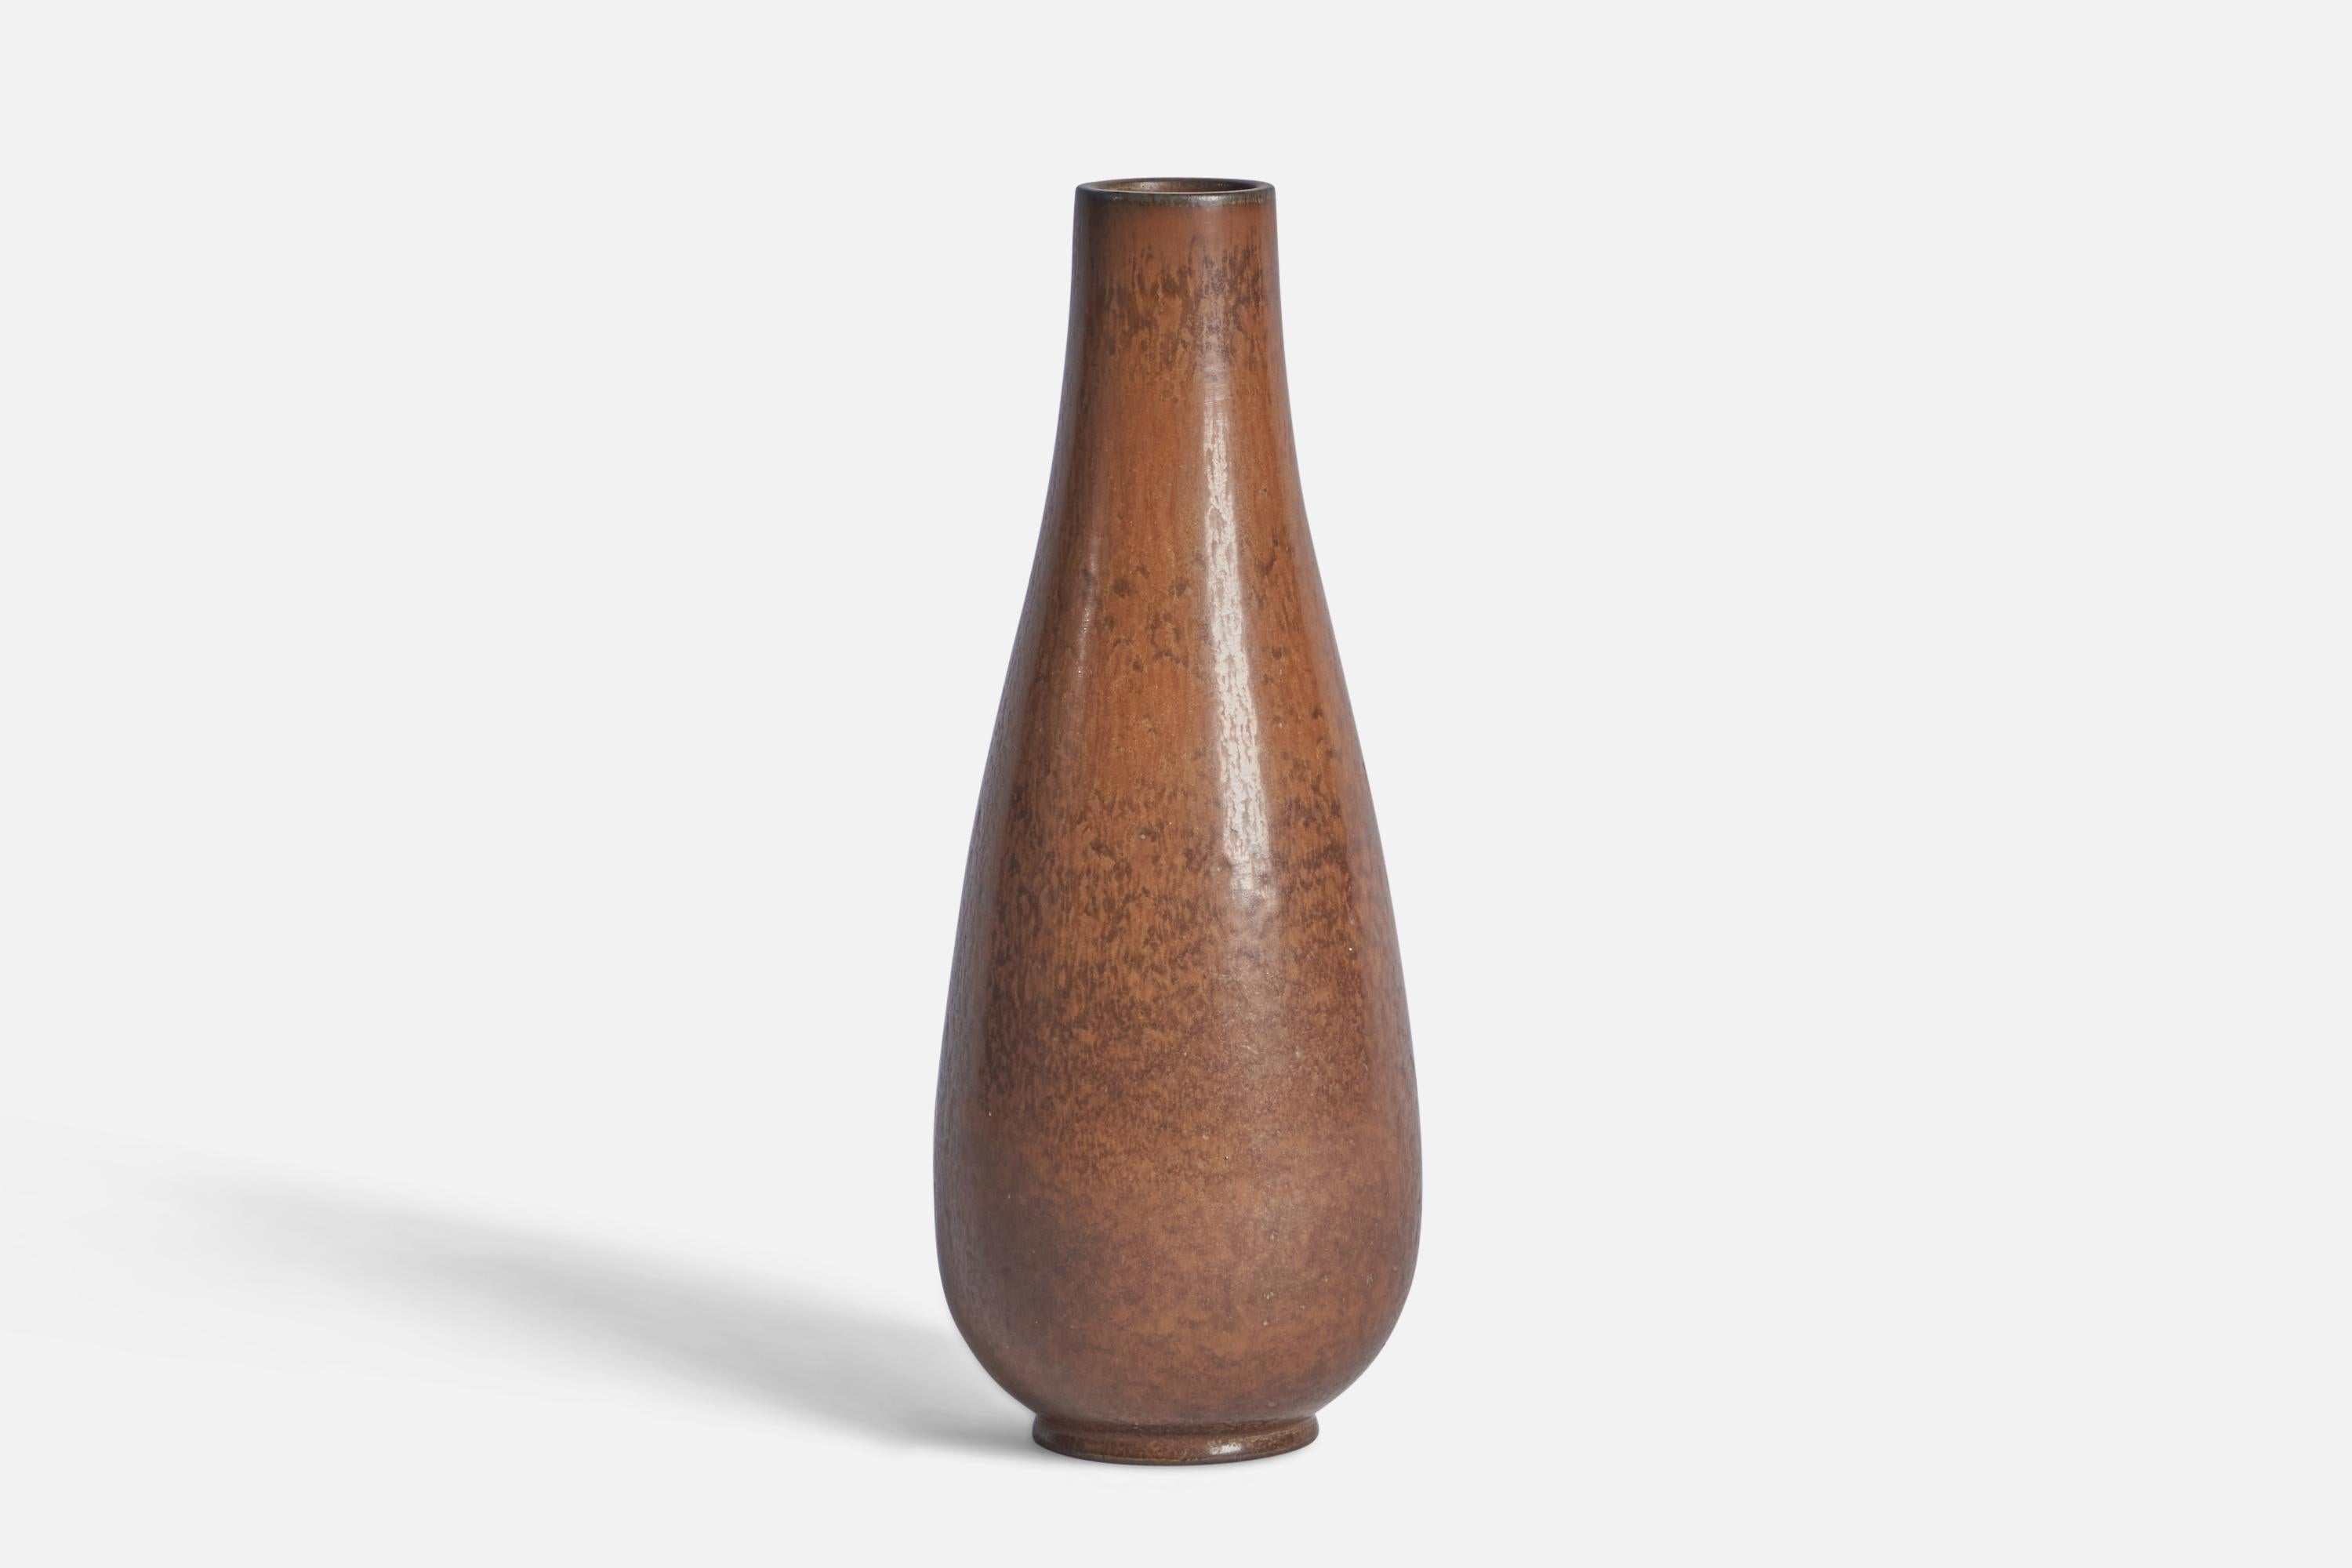 A brown-glazed stoneware vase designed by Gunnar Nylund and produced by Rörstrand, Sweden, 1940s.